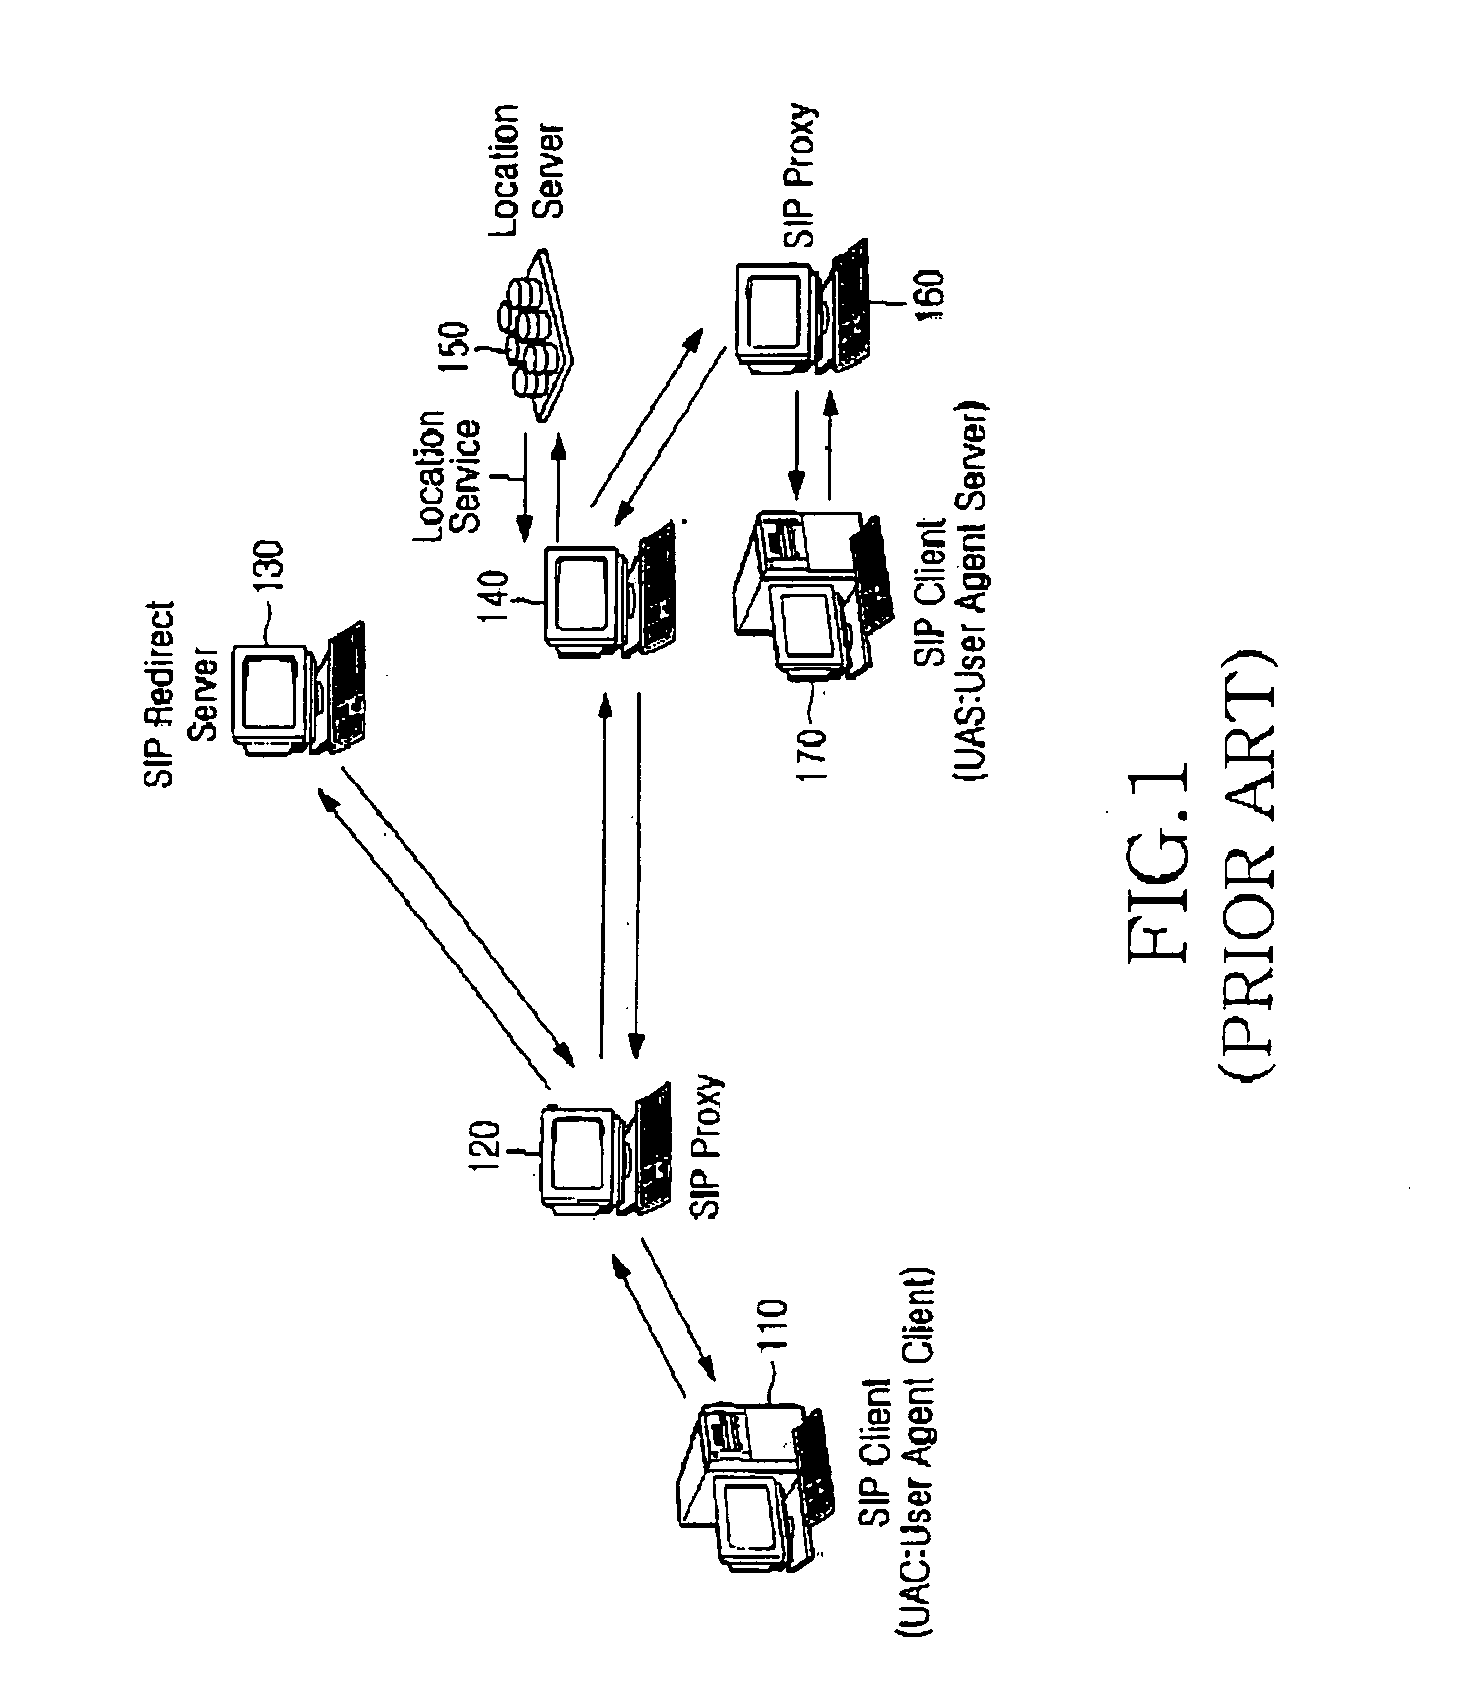 System and method for providing service in a communication system